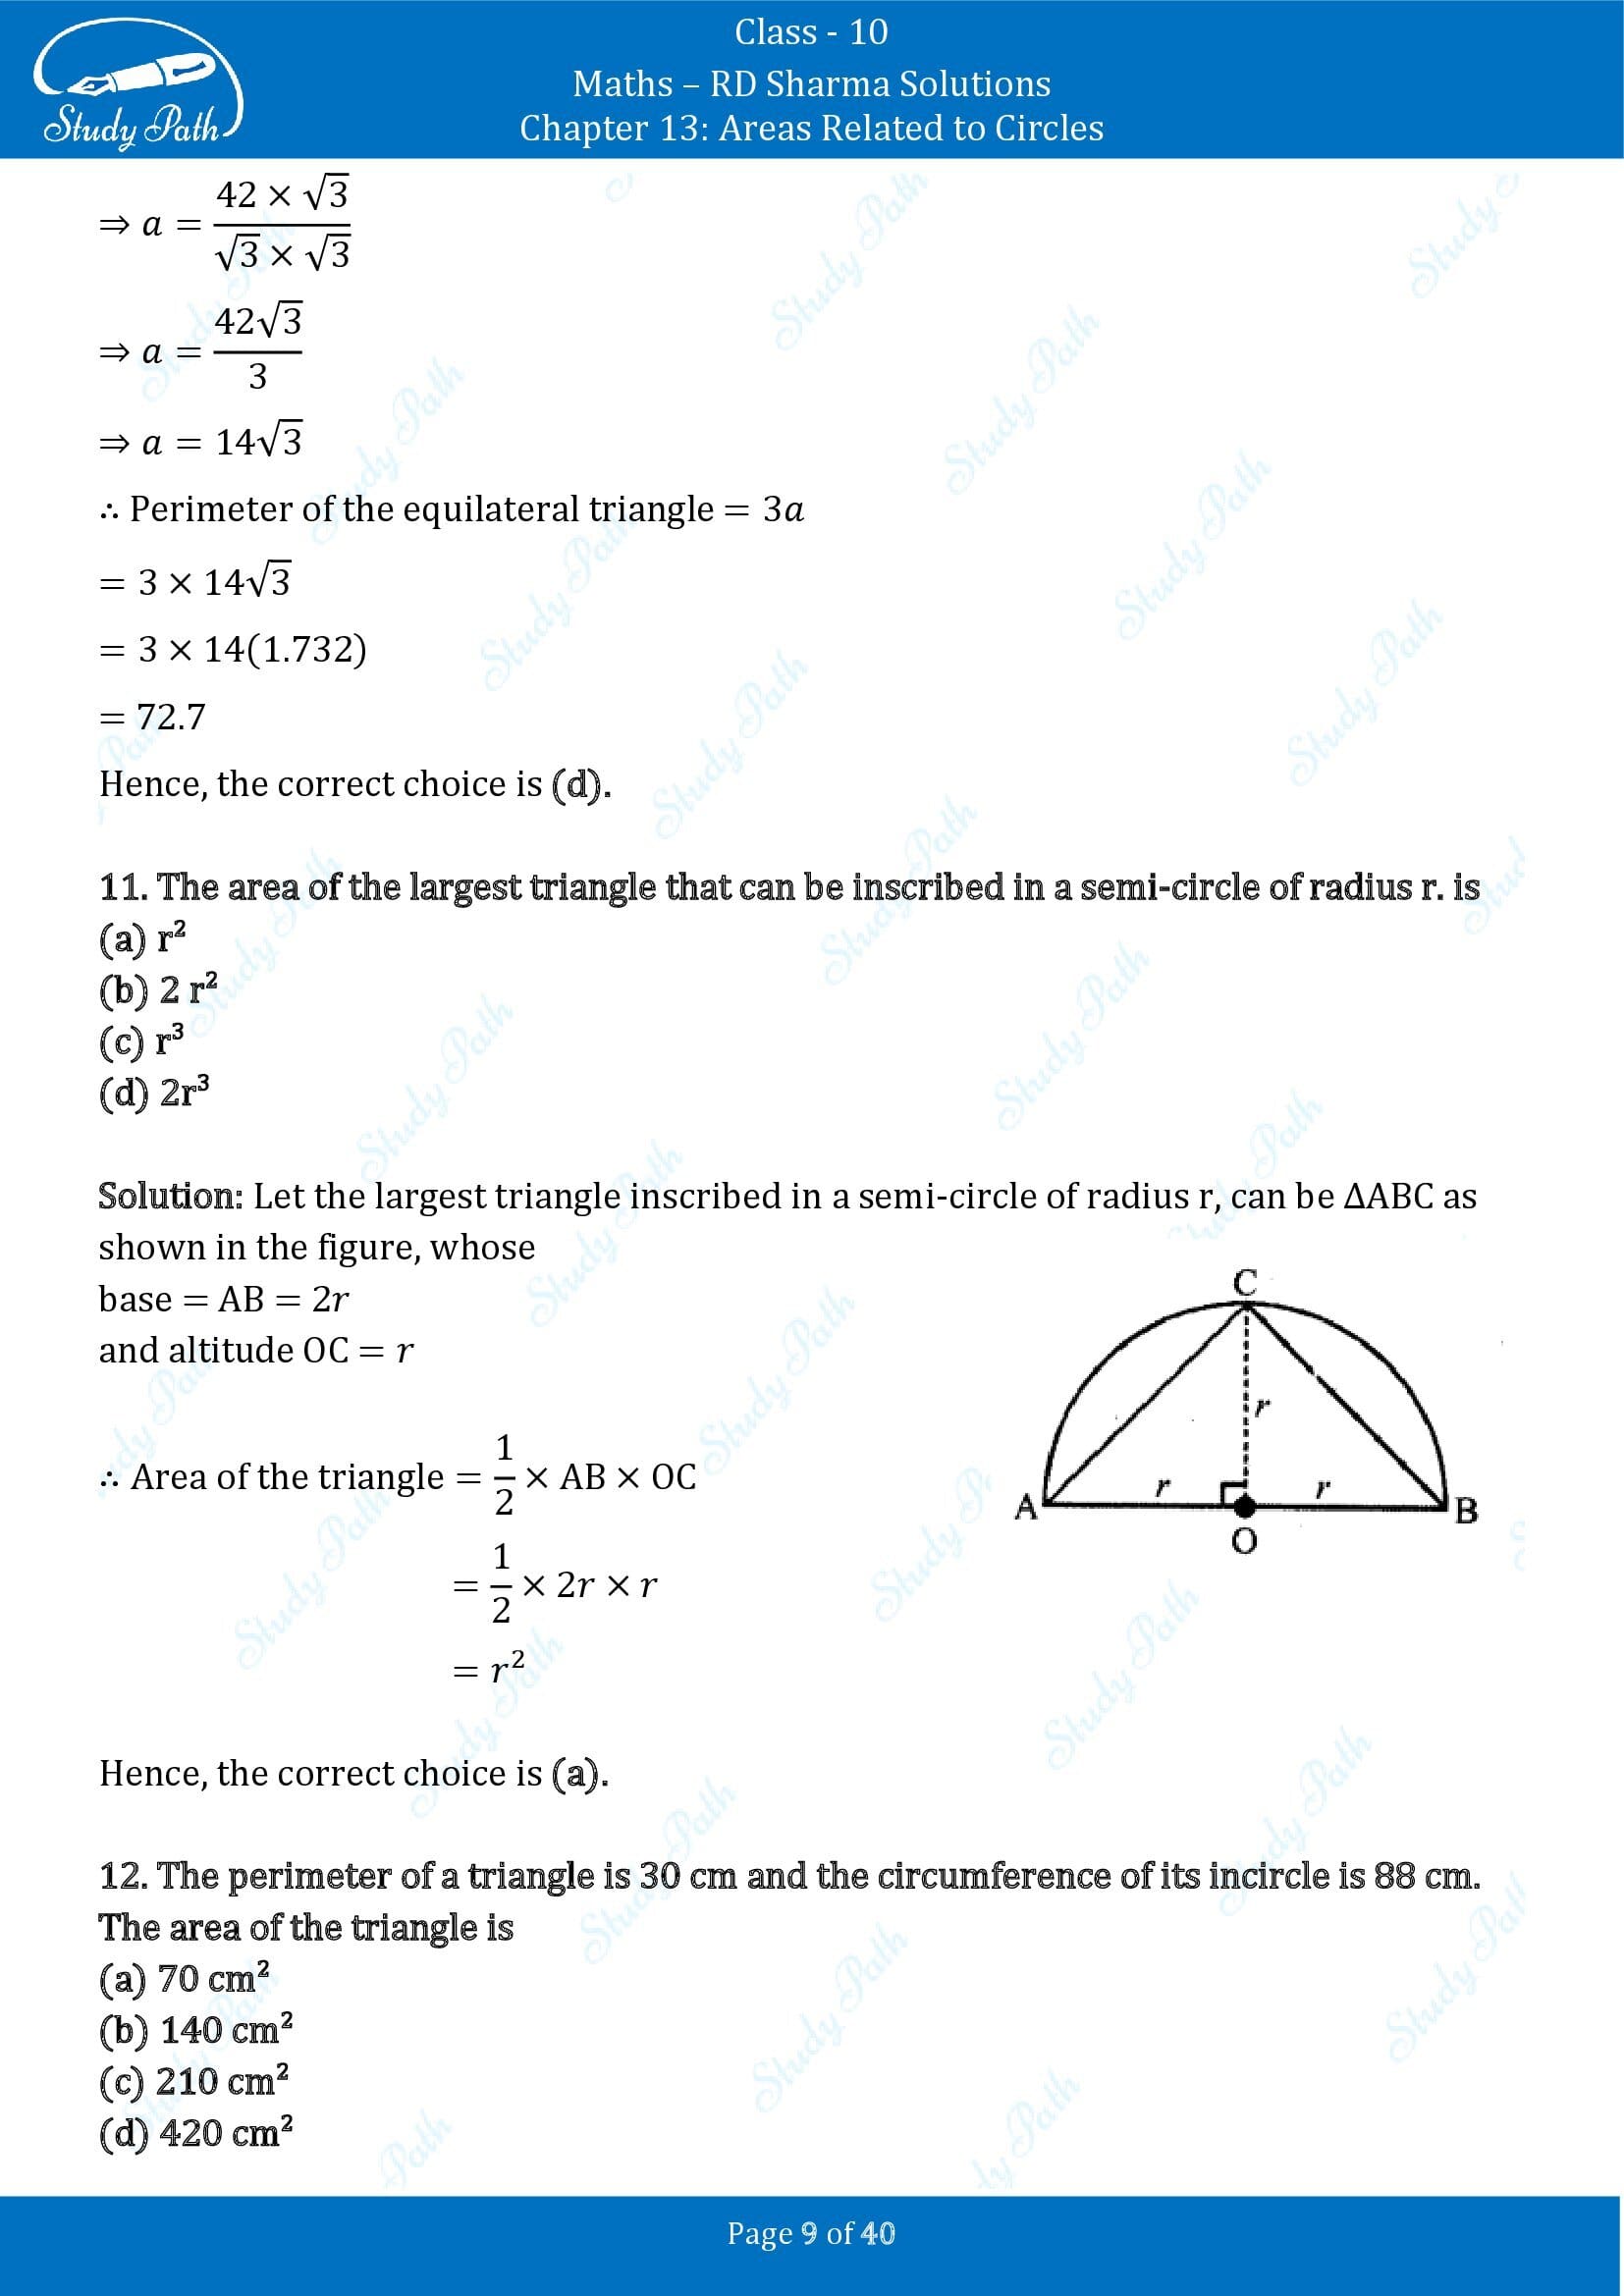 RD Sharma Solutions Class 10 Chapter 13 Areas Related to Circles Multiple Choice Question MCQs 00009